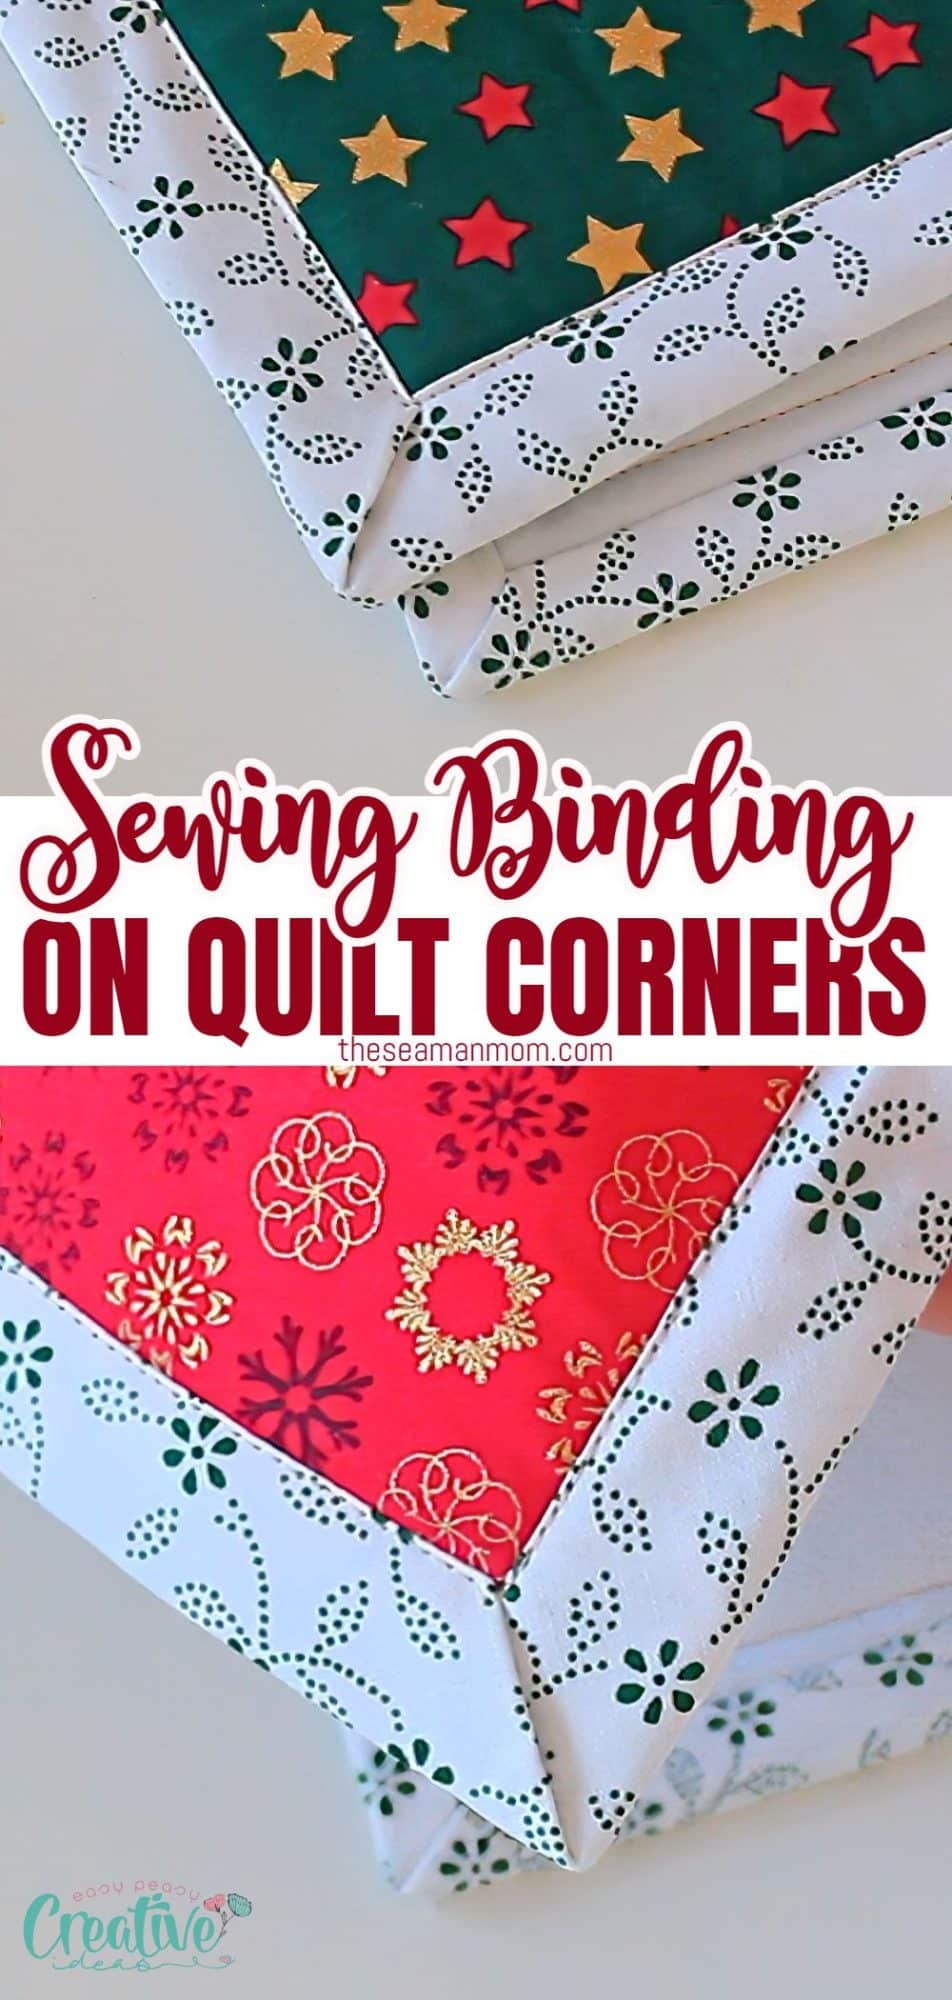 Sewing binding on quilt corners